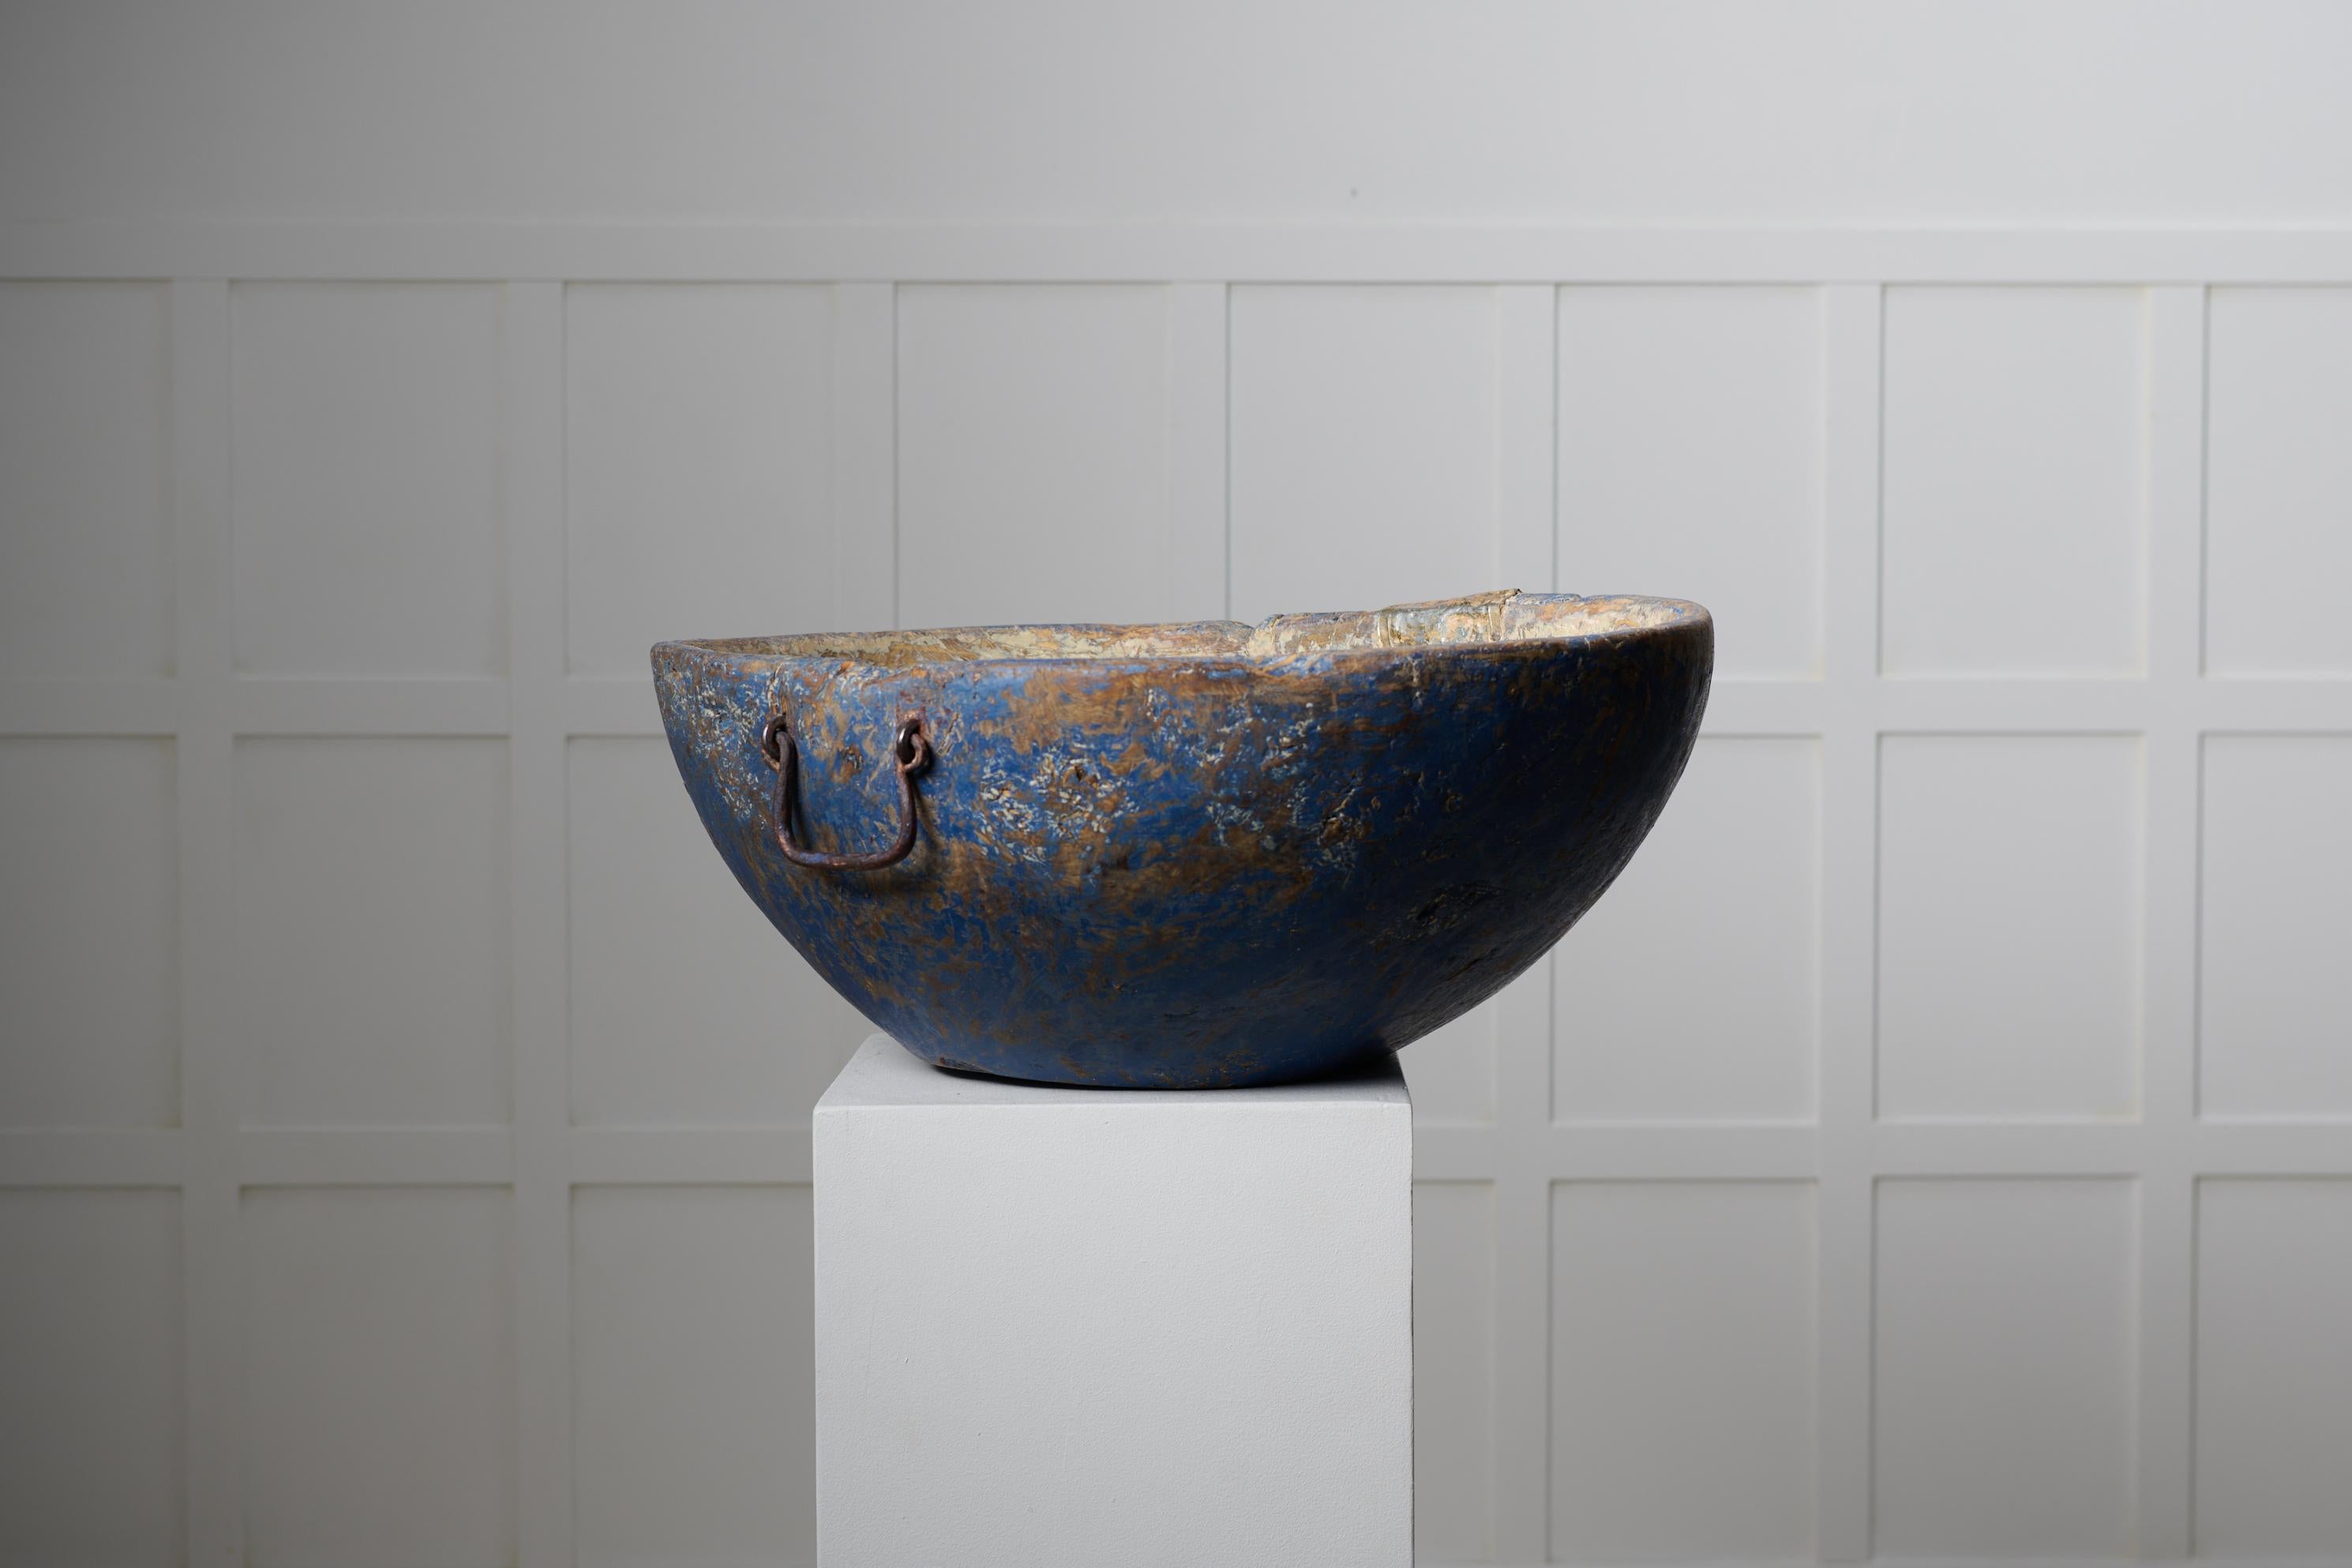 Unique unusual wood bowl from northern Sweden. The bowl is large with original blue paint. There is an old repair in tin to one side. The bowl has the authentic patina of a genuine Swedish antique, bowls like this were often used to prepare and